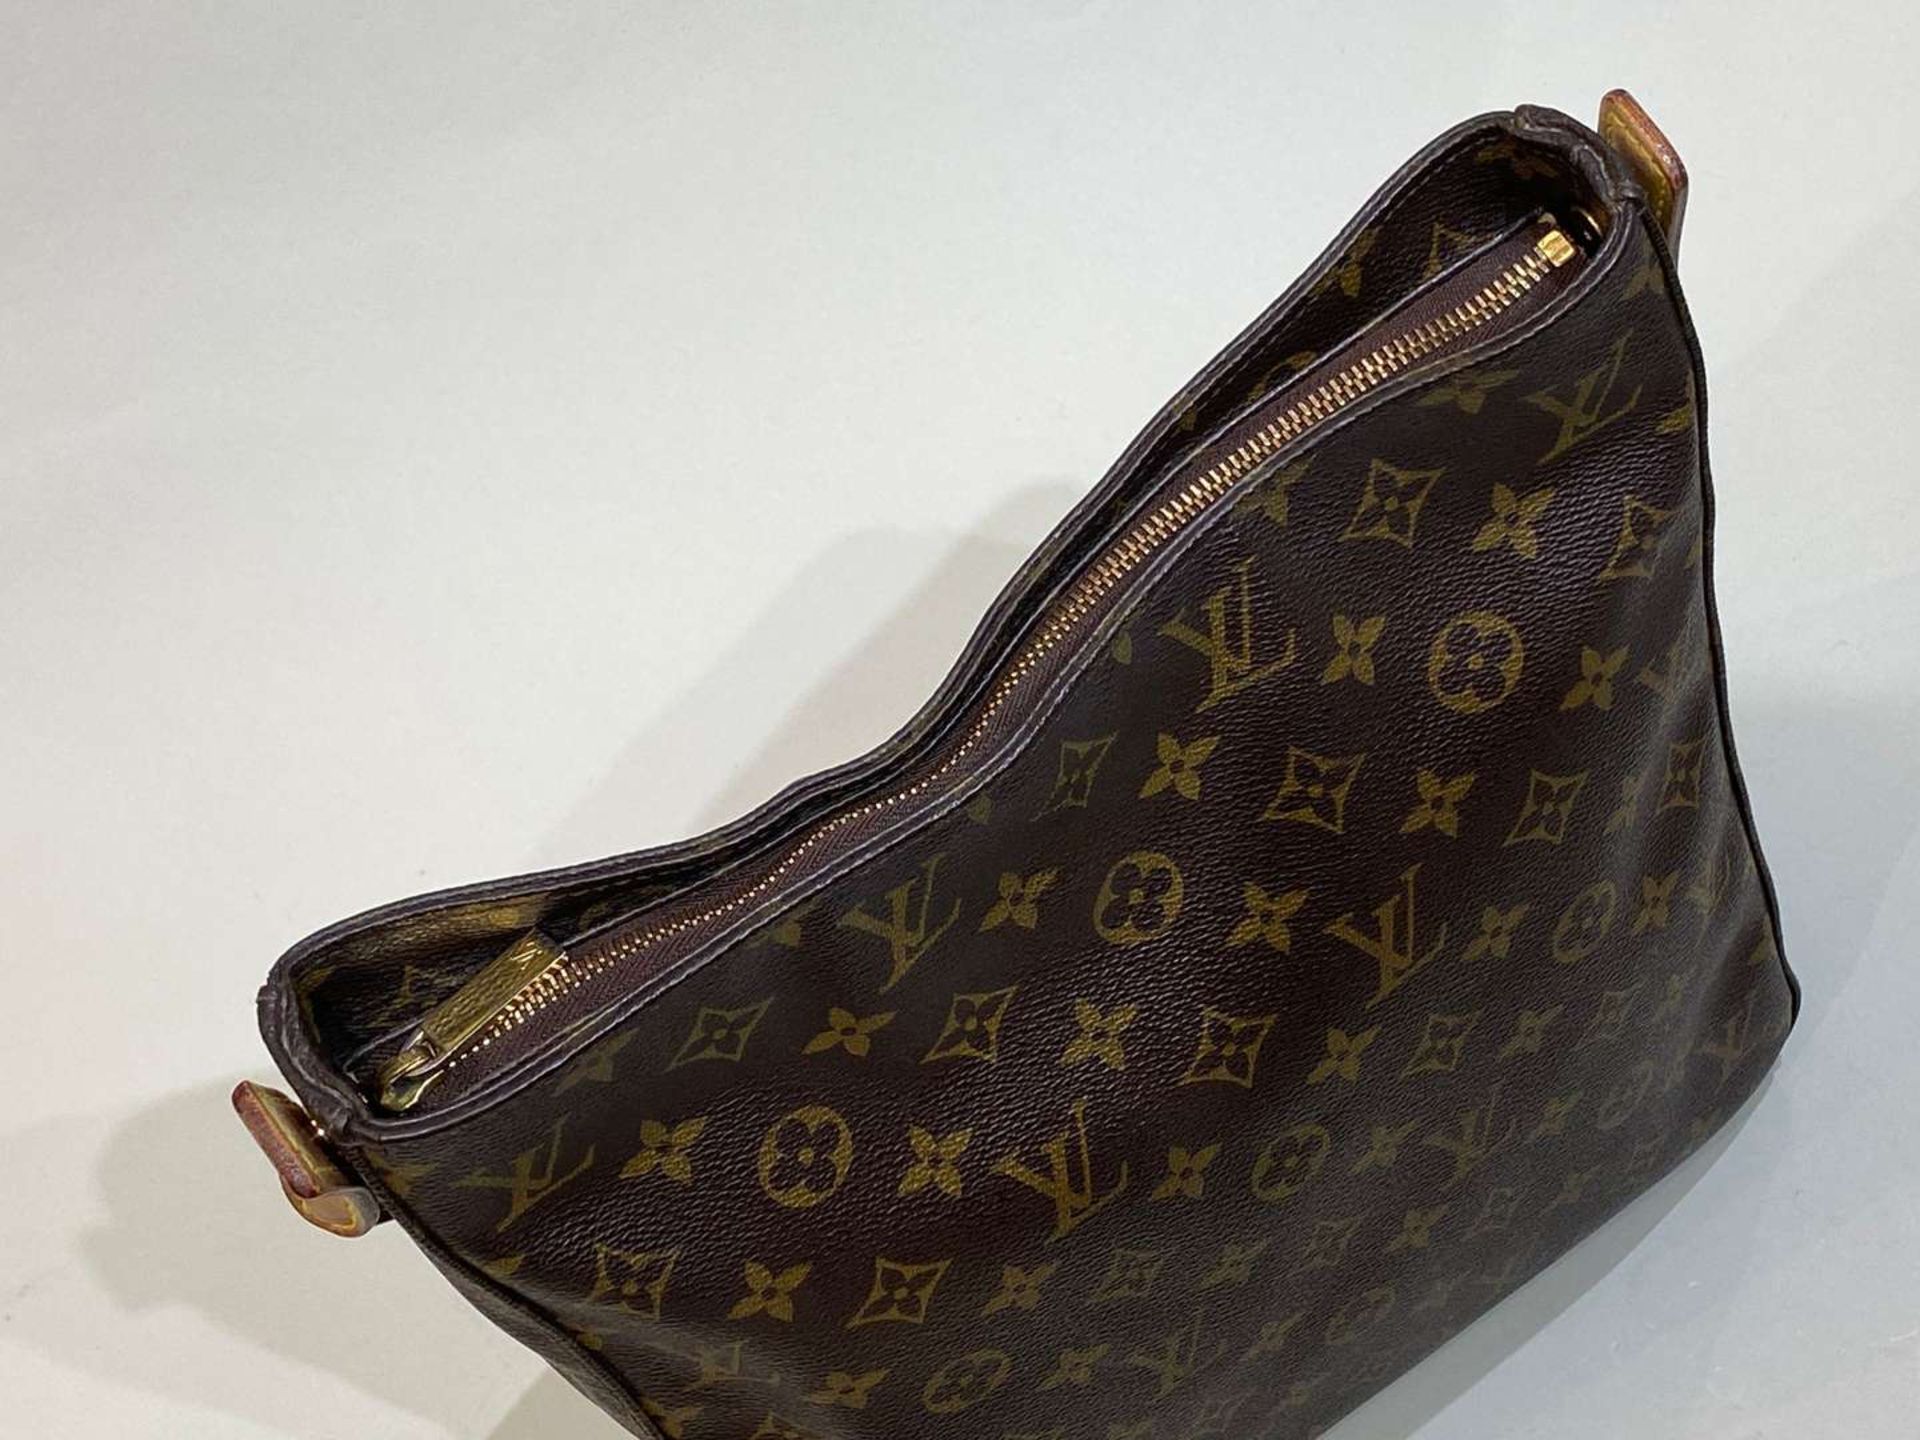 LOUIS VUITTON, Looping, tan stitched leather and monogrammed shoulder bag - Image 6 of 7